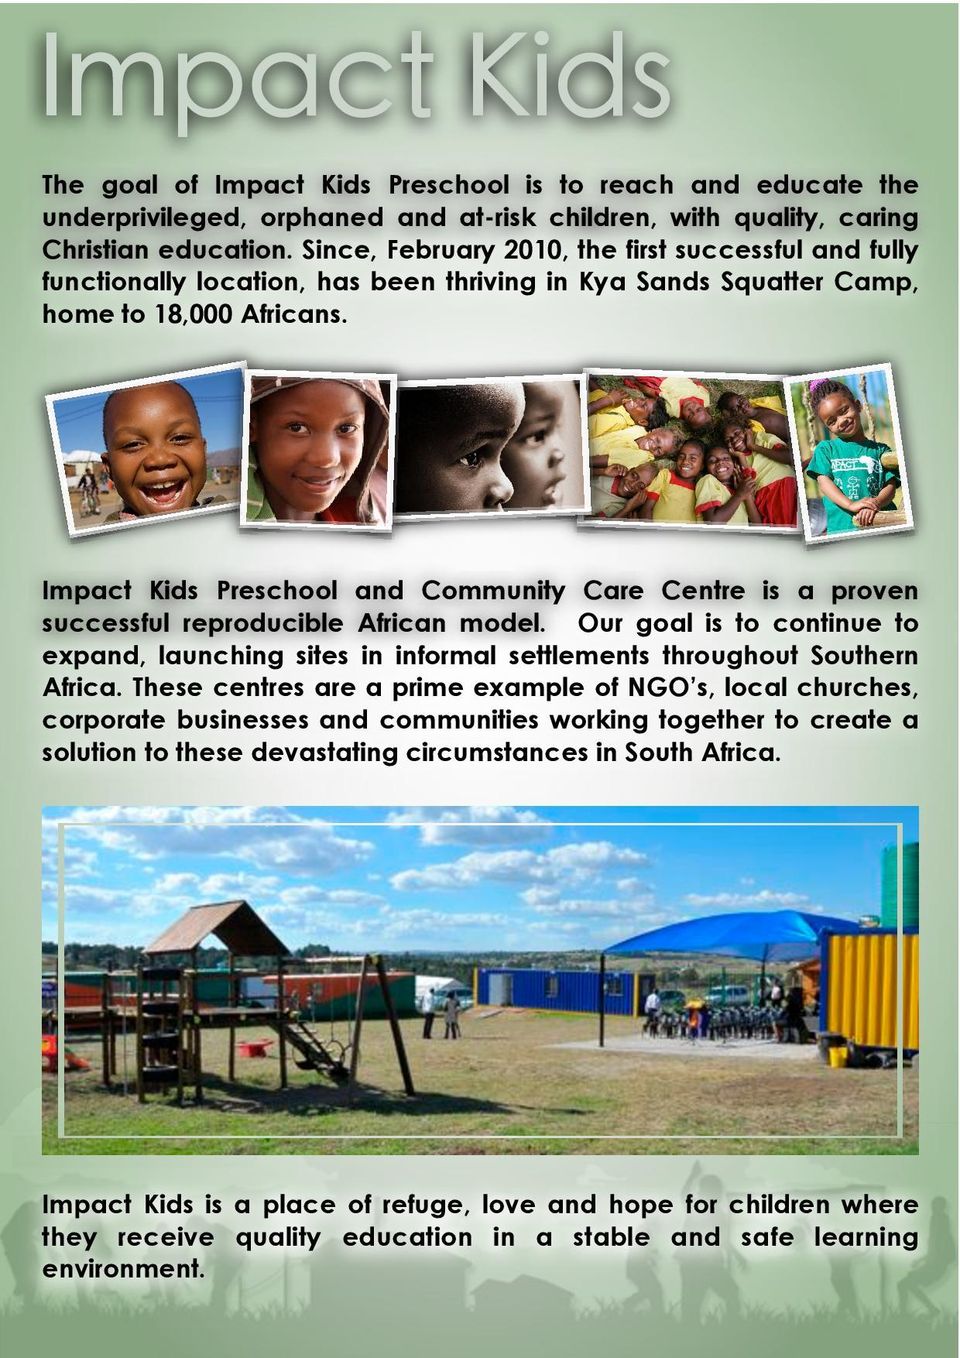 Impact Kids Preschool and Community Care Centre is a proven successful reproducible African model.